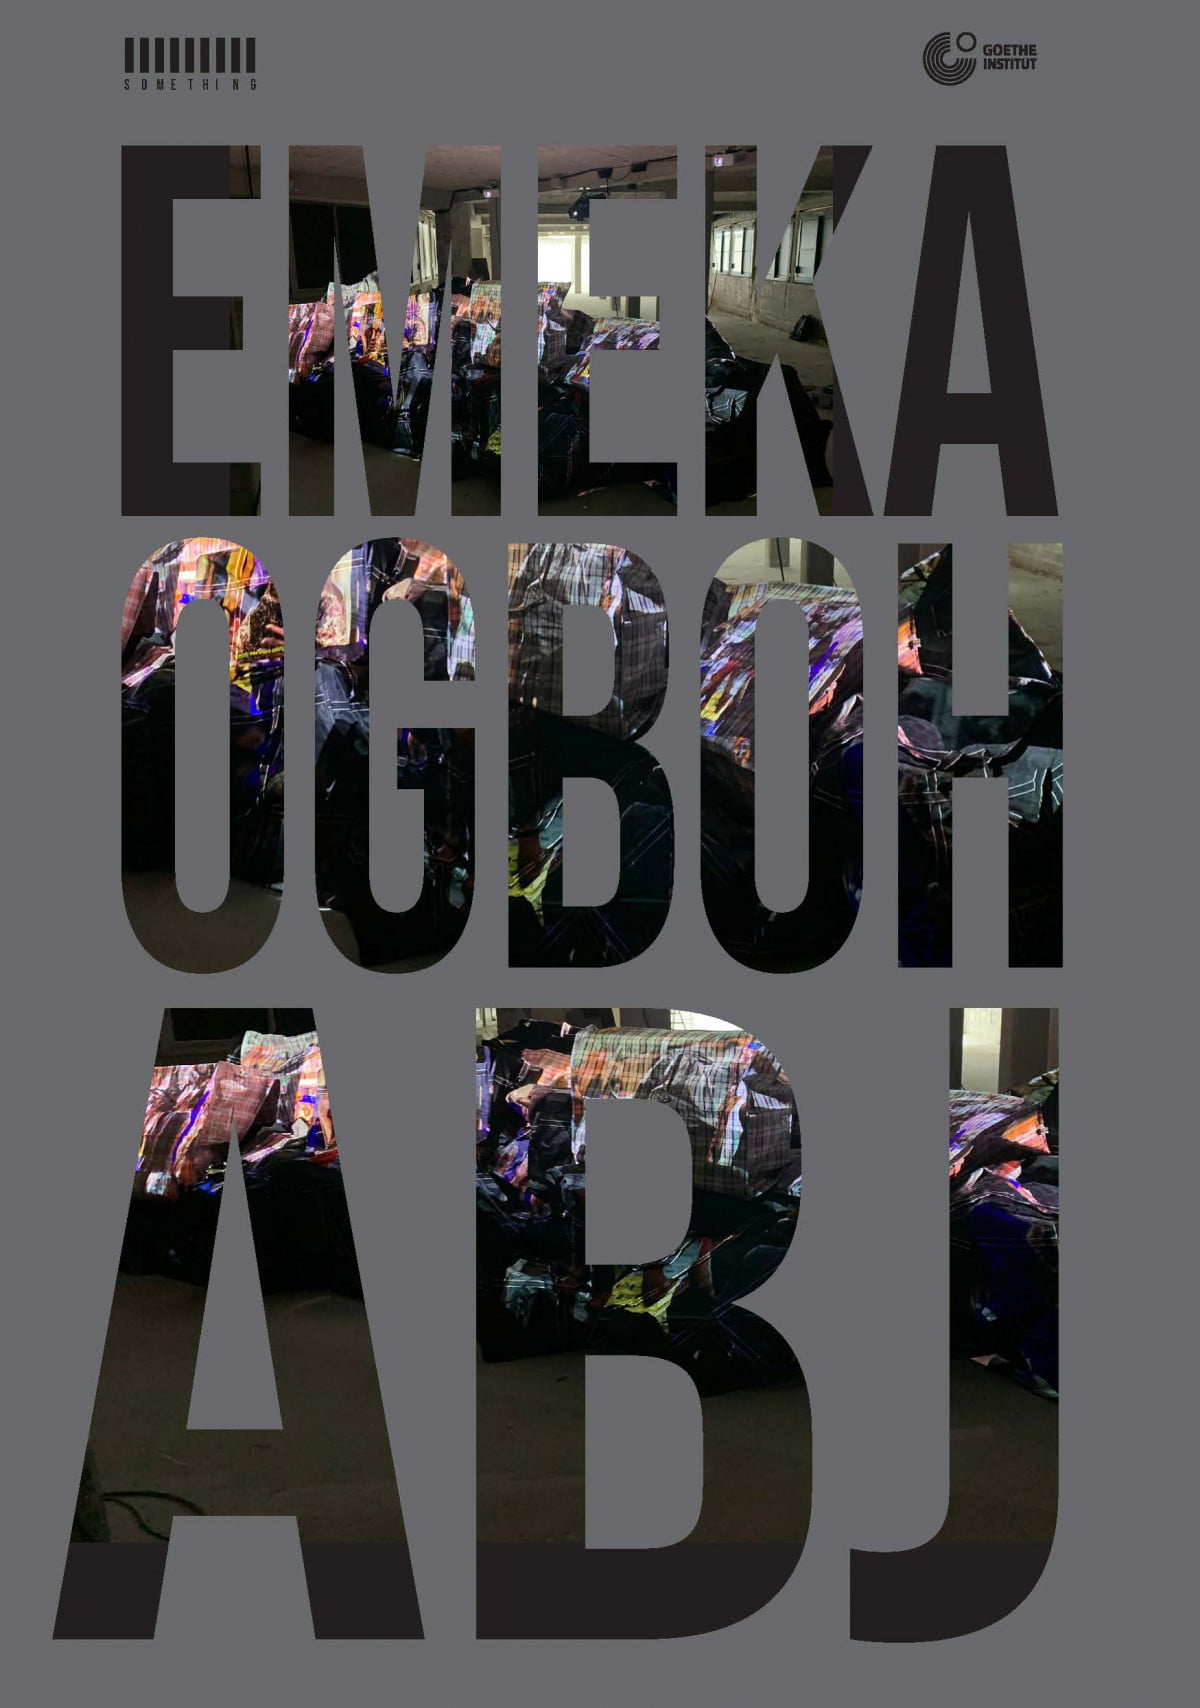 “ABJ” EXHIBITION BY EMEKA OGBOH